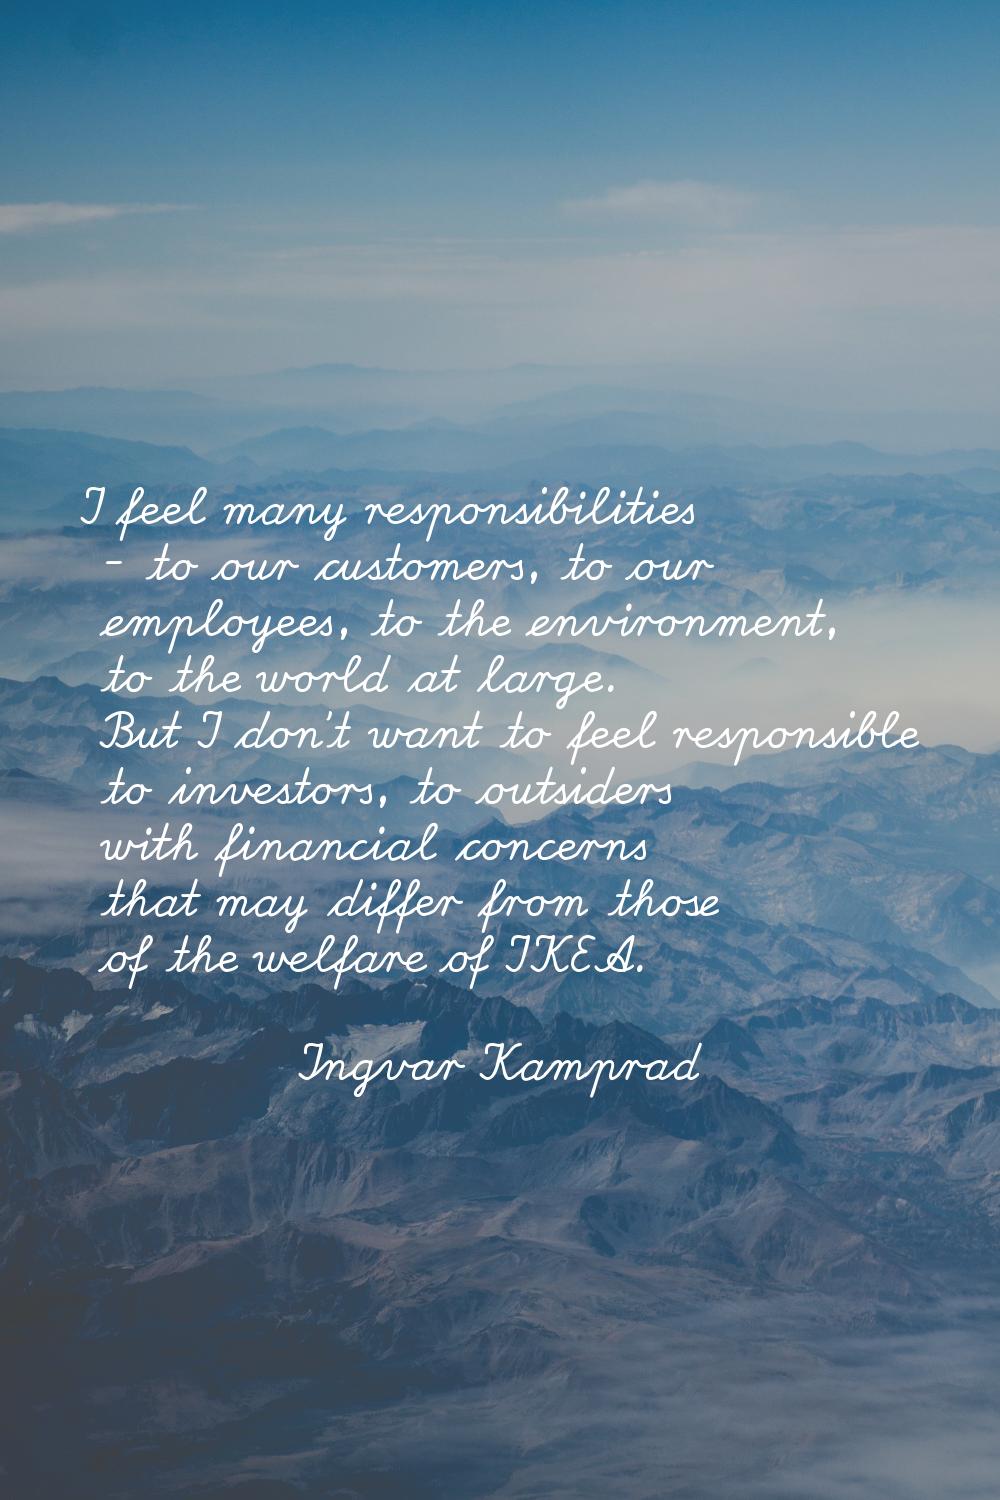 I feel many responsibilities - to our customers, to our employees, to the environment, to the world